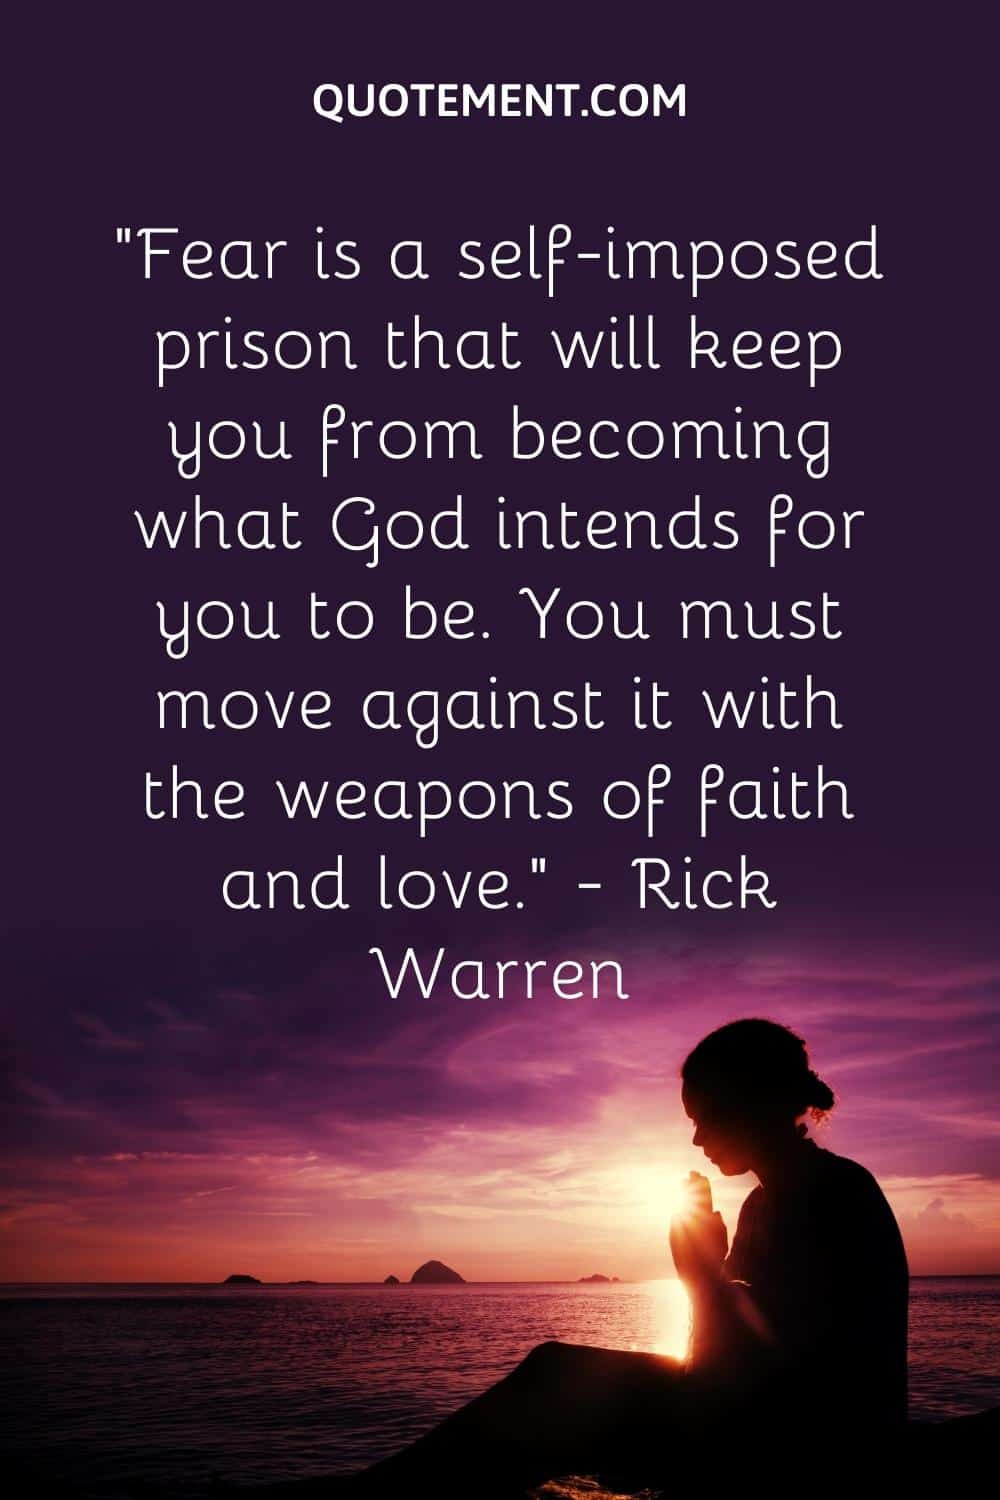 “Fear is a self-imposed prison that will keep you from becoming what God intends for you to be. You must move against it with the weapons of faith and love.” — Rick Warren